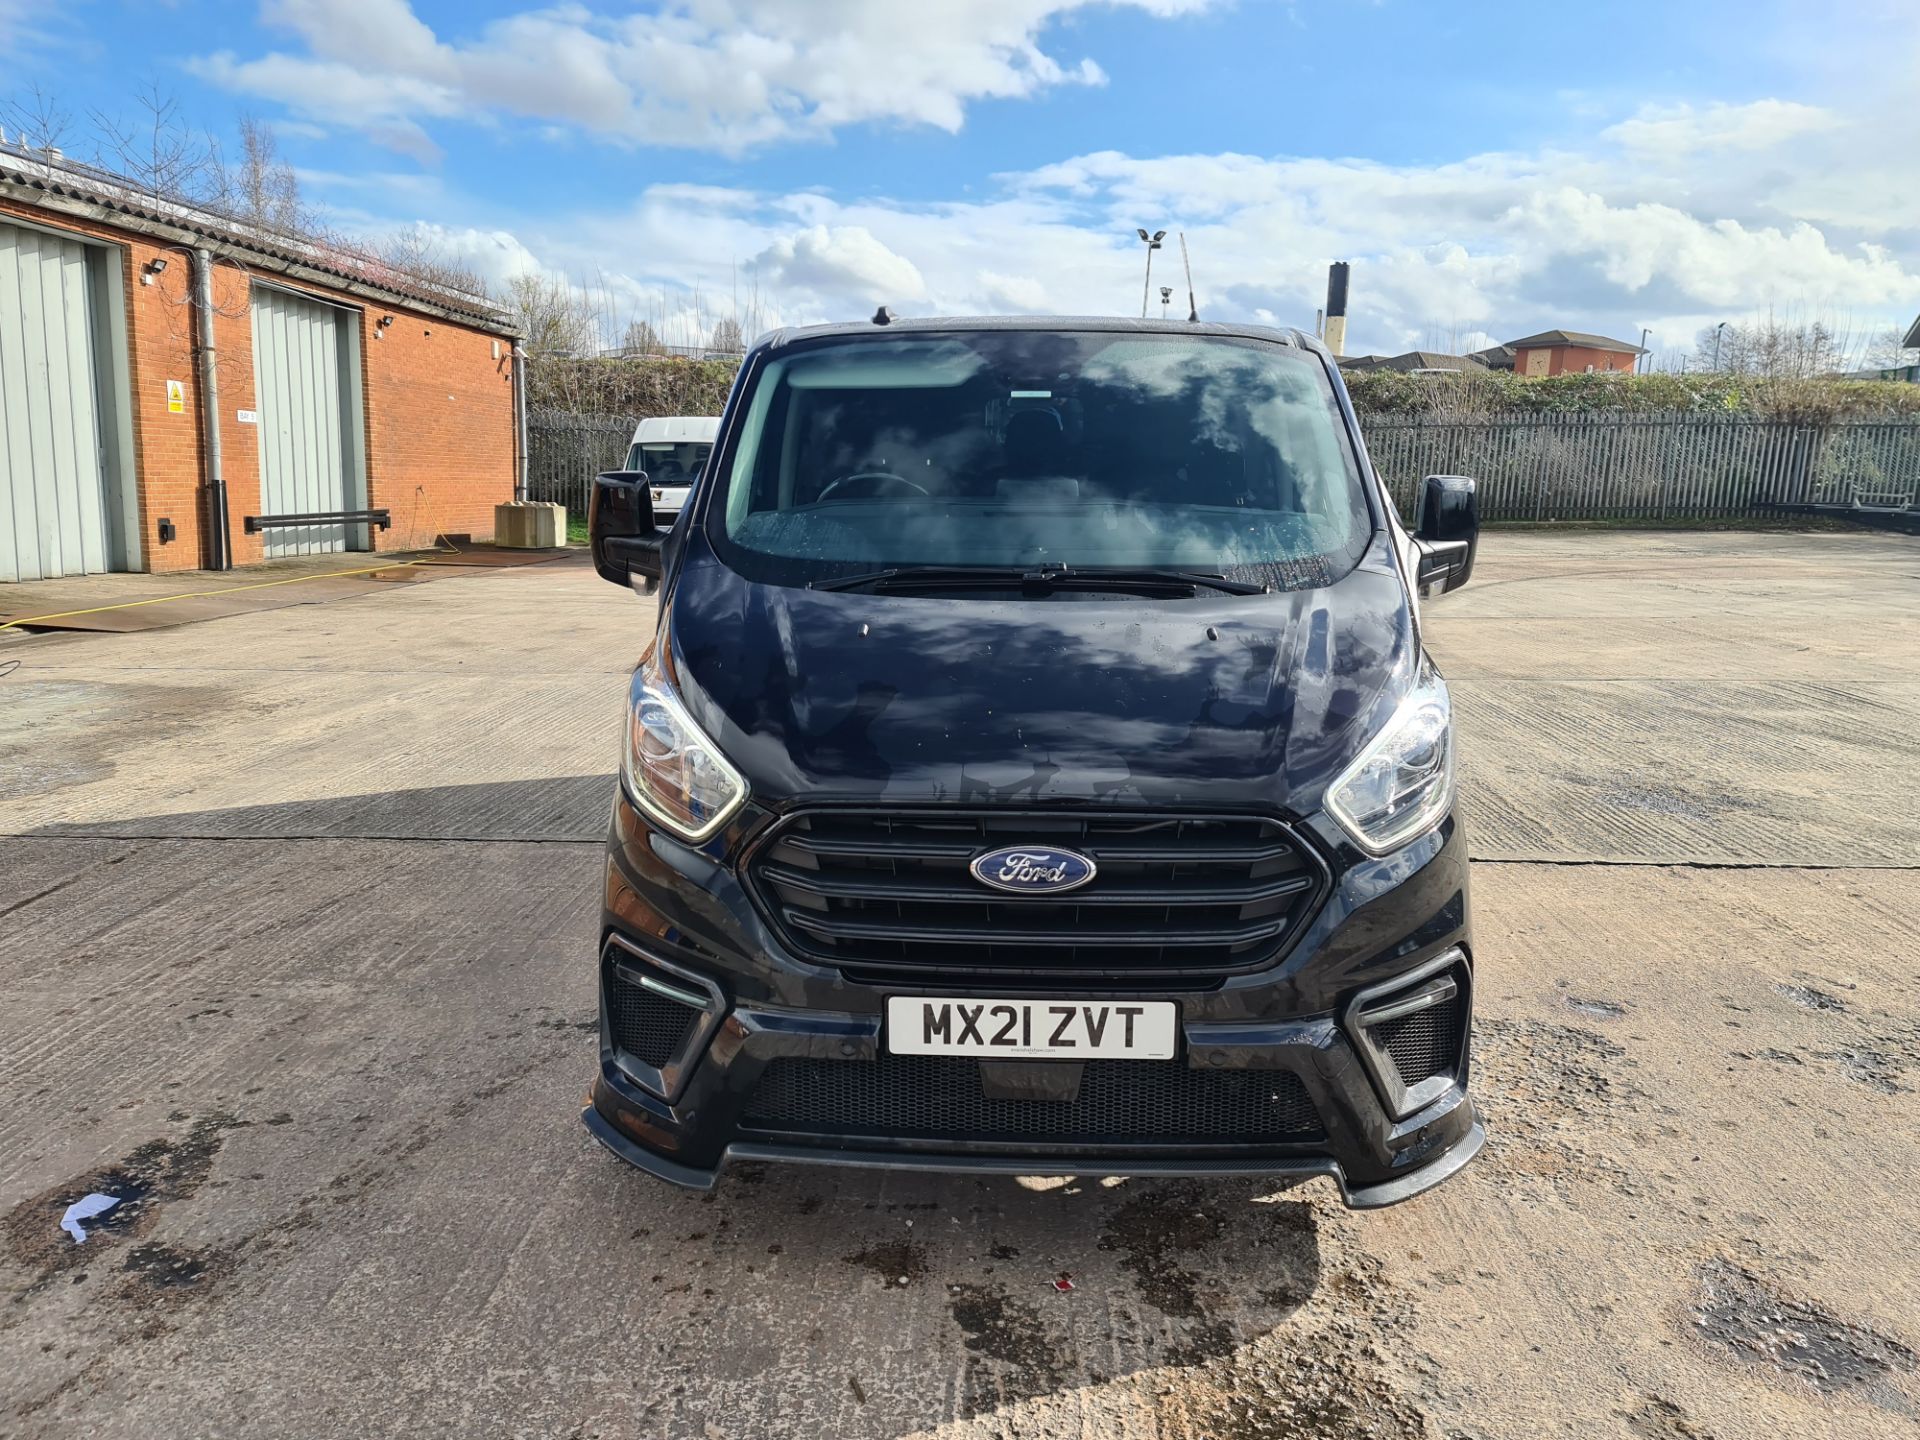 2021 Ford Transit 320LMTD Motion R panel van, auto gearbox, Ultra High Spec - Image 8 of 102